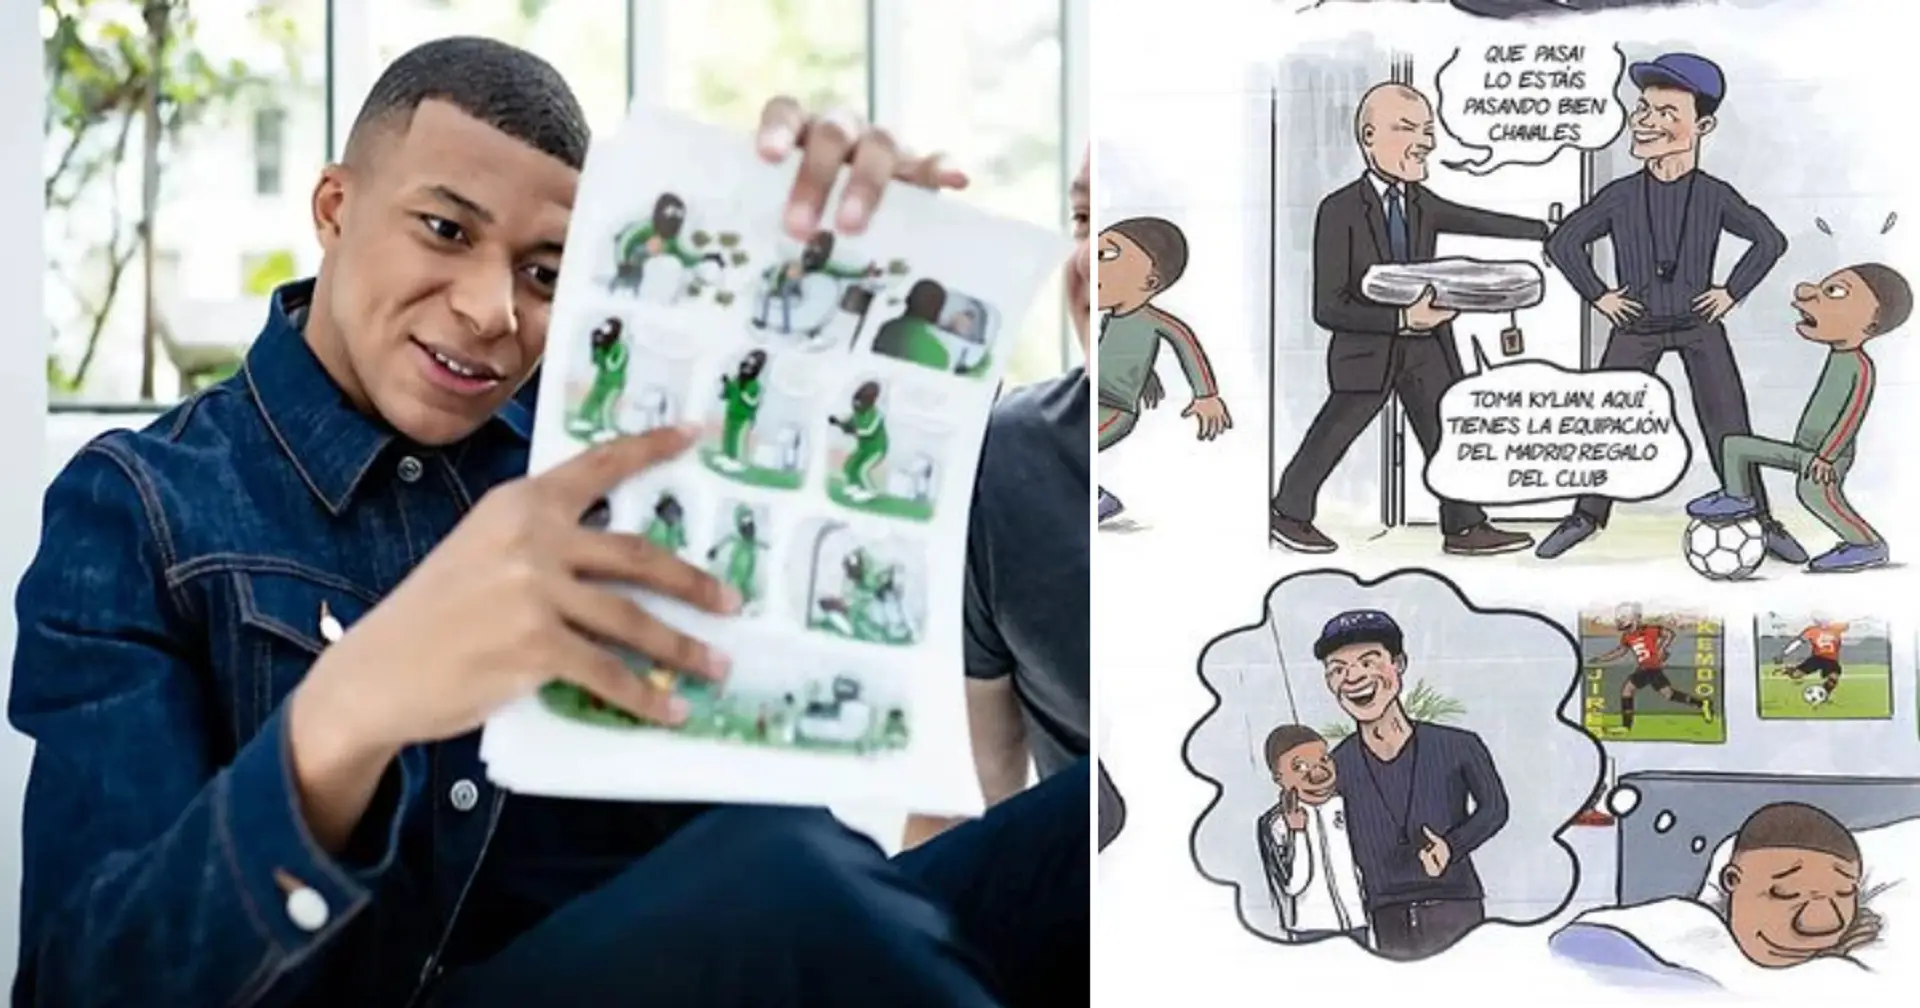 Kylian Mbappe labels trip to Real Madrid the best day of his life in his new comic book